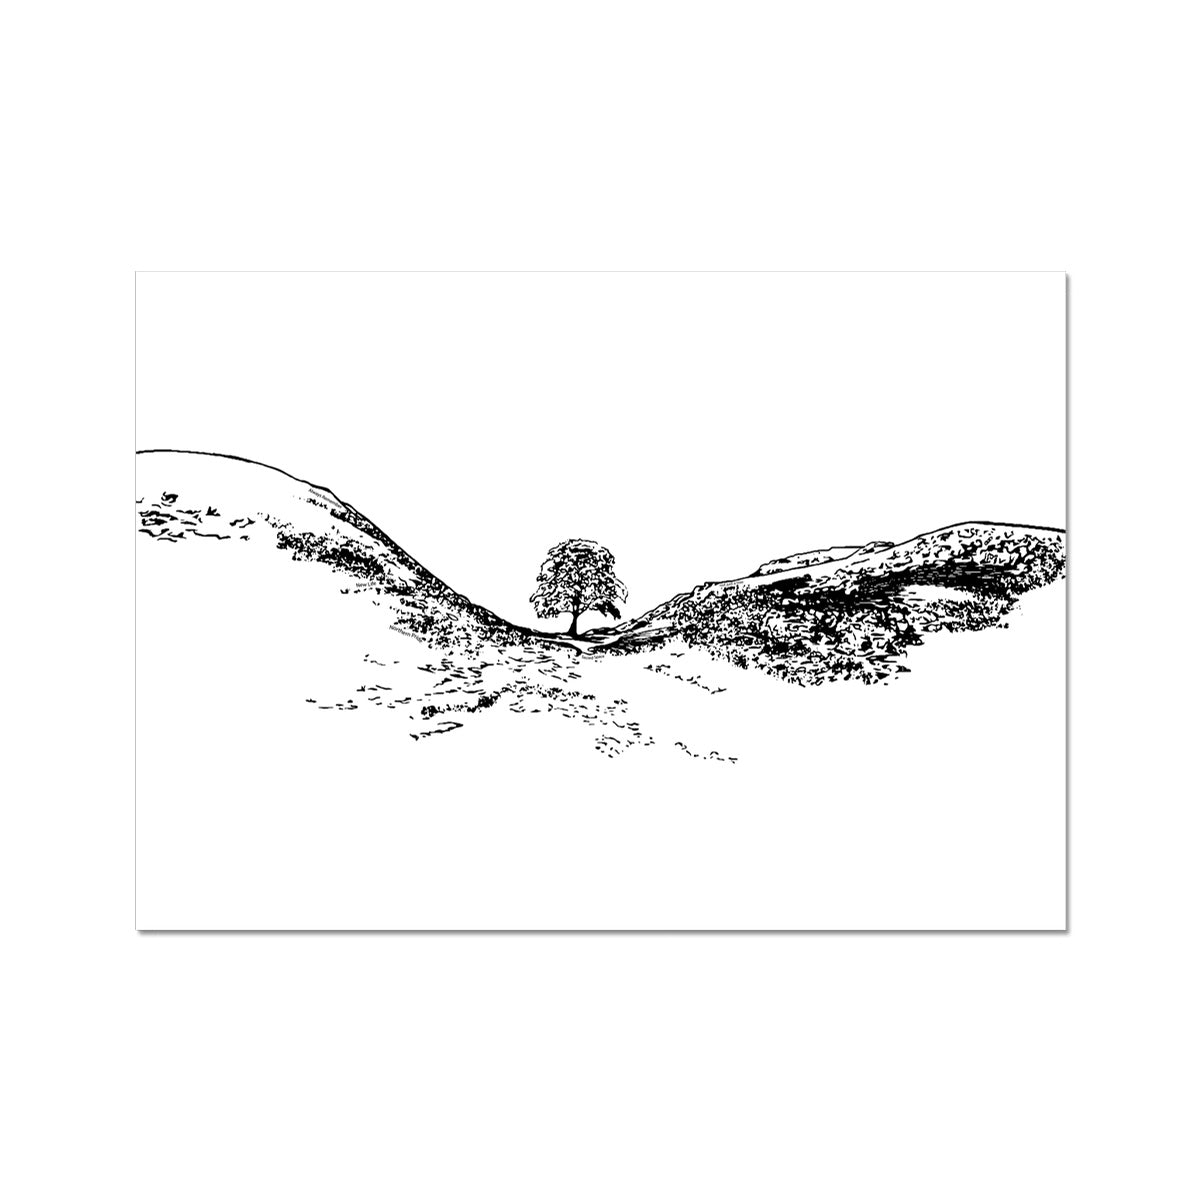 Sycamore Gap themed print featuring Sycamore Gap tree by Powder Butterfly